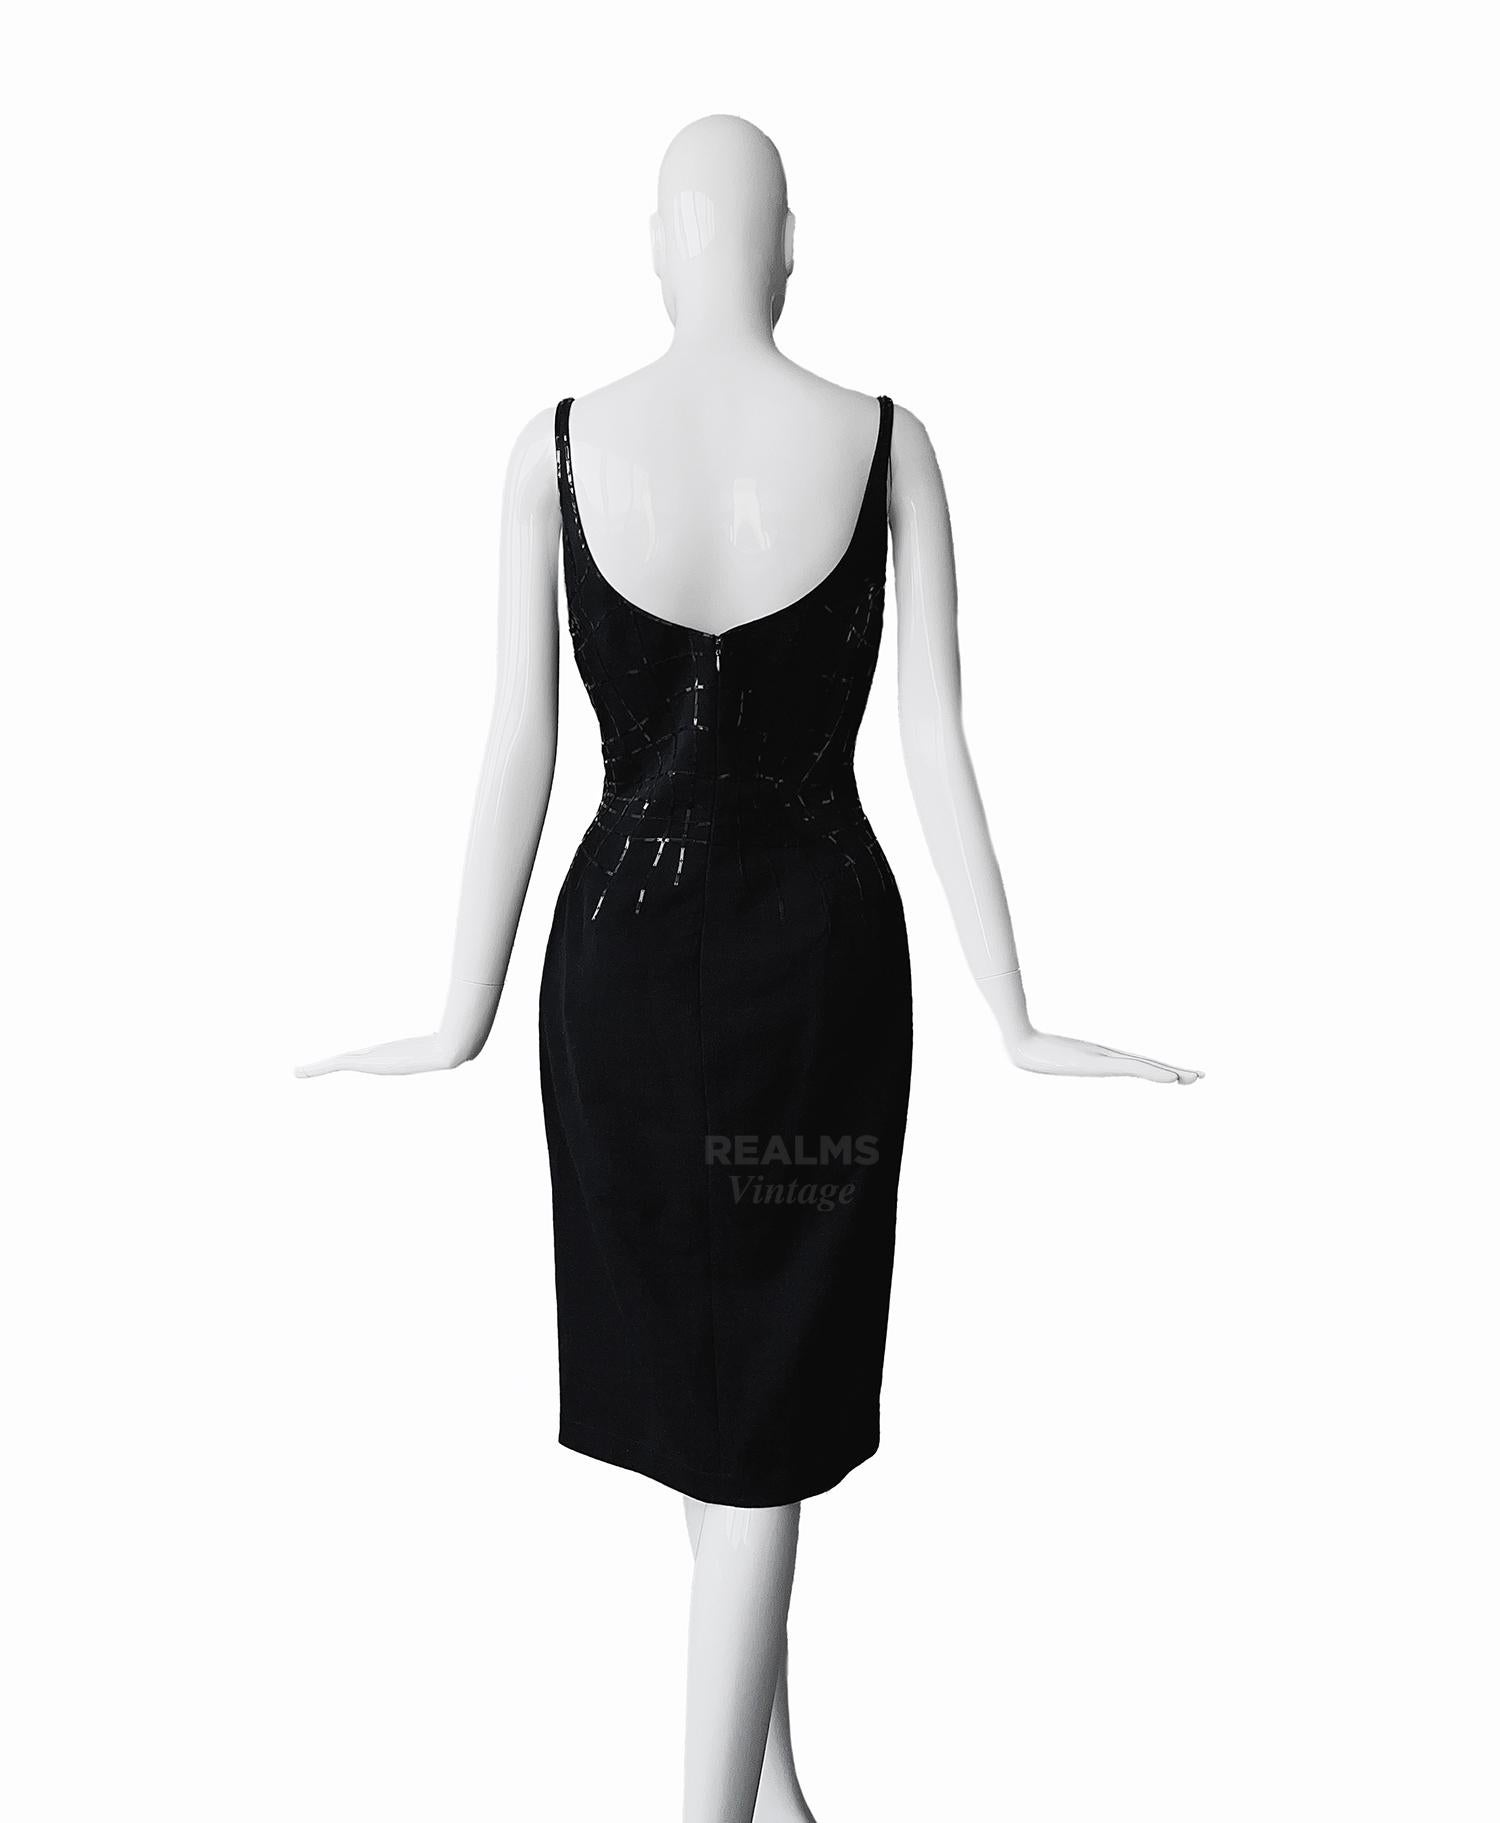 Women's Thierry Mugler Couture Evening Dress Iconic Black Spider Web Anatomique Computer For Sale